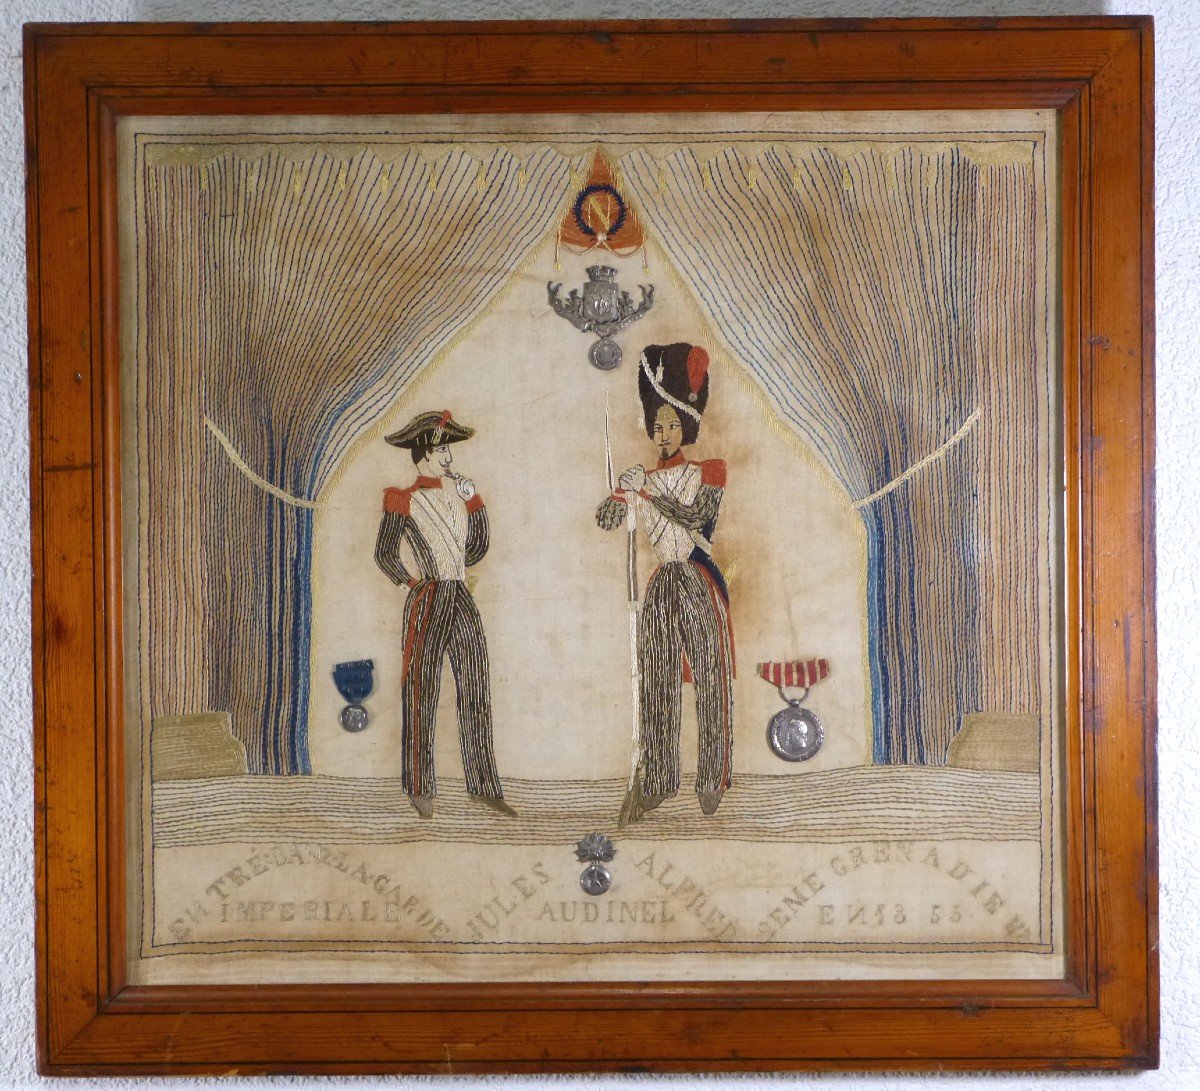 Tribute To Grenadier Ja Audinel Imperial Guard 1855 Embroidery Napoléon